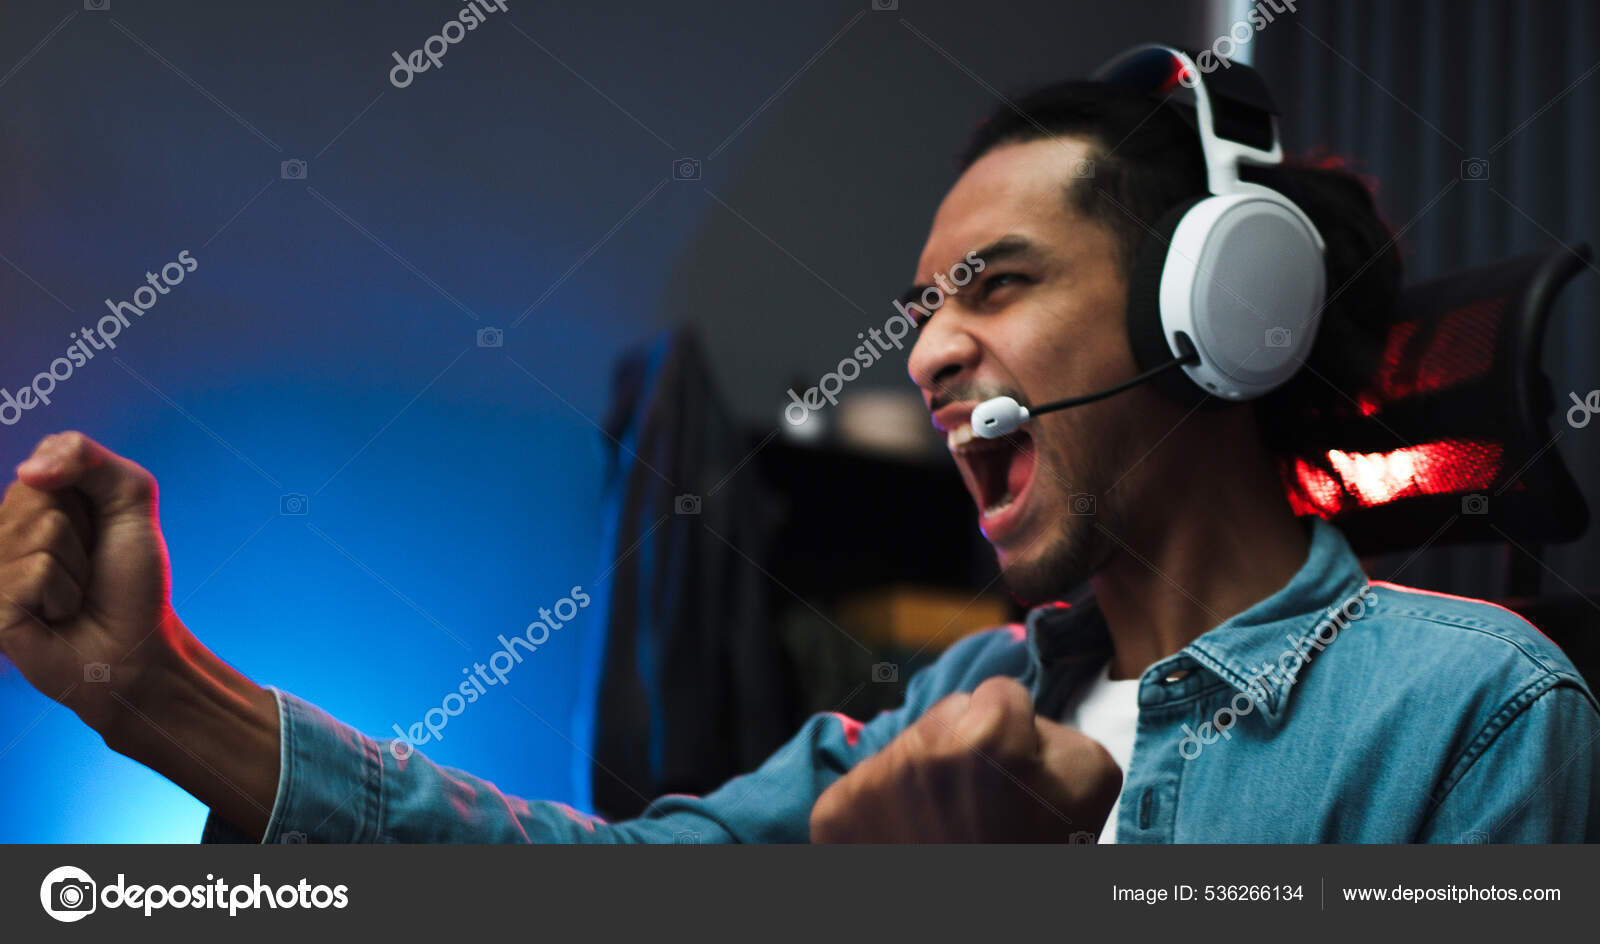 Young Asian Man Playing Online Computer Video Game Colorful Lighting Stock Photo by ©beer5020.gmail 536266134